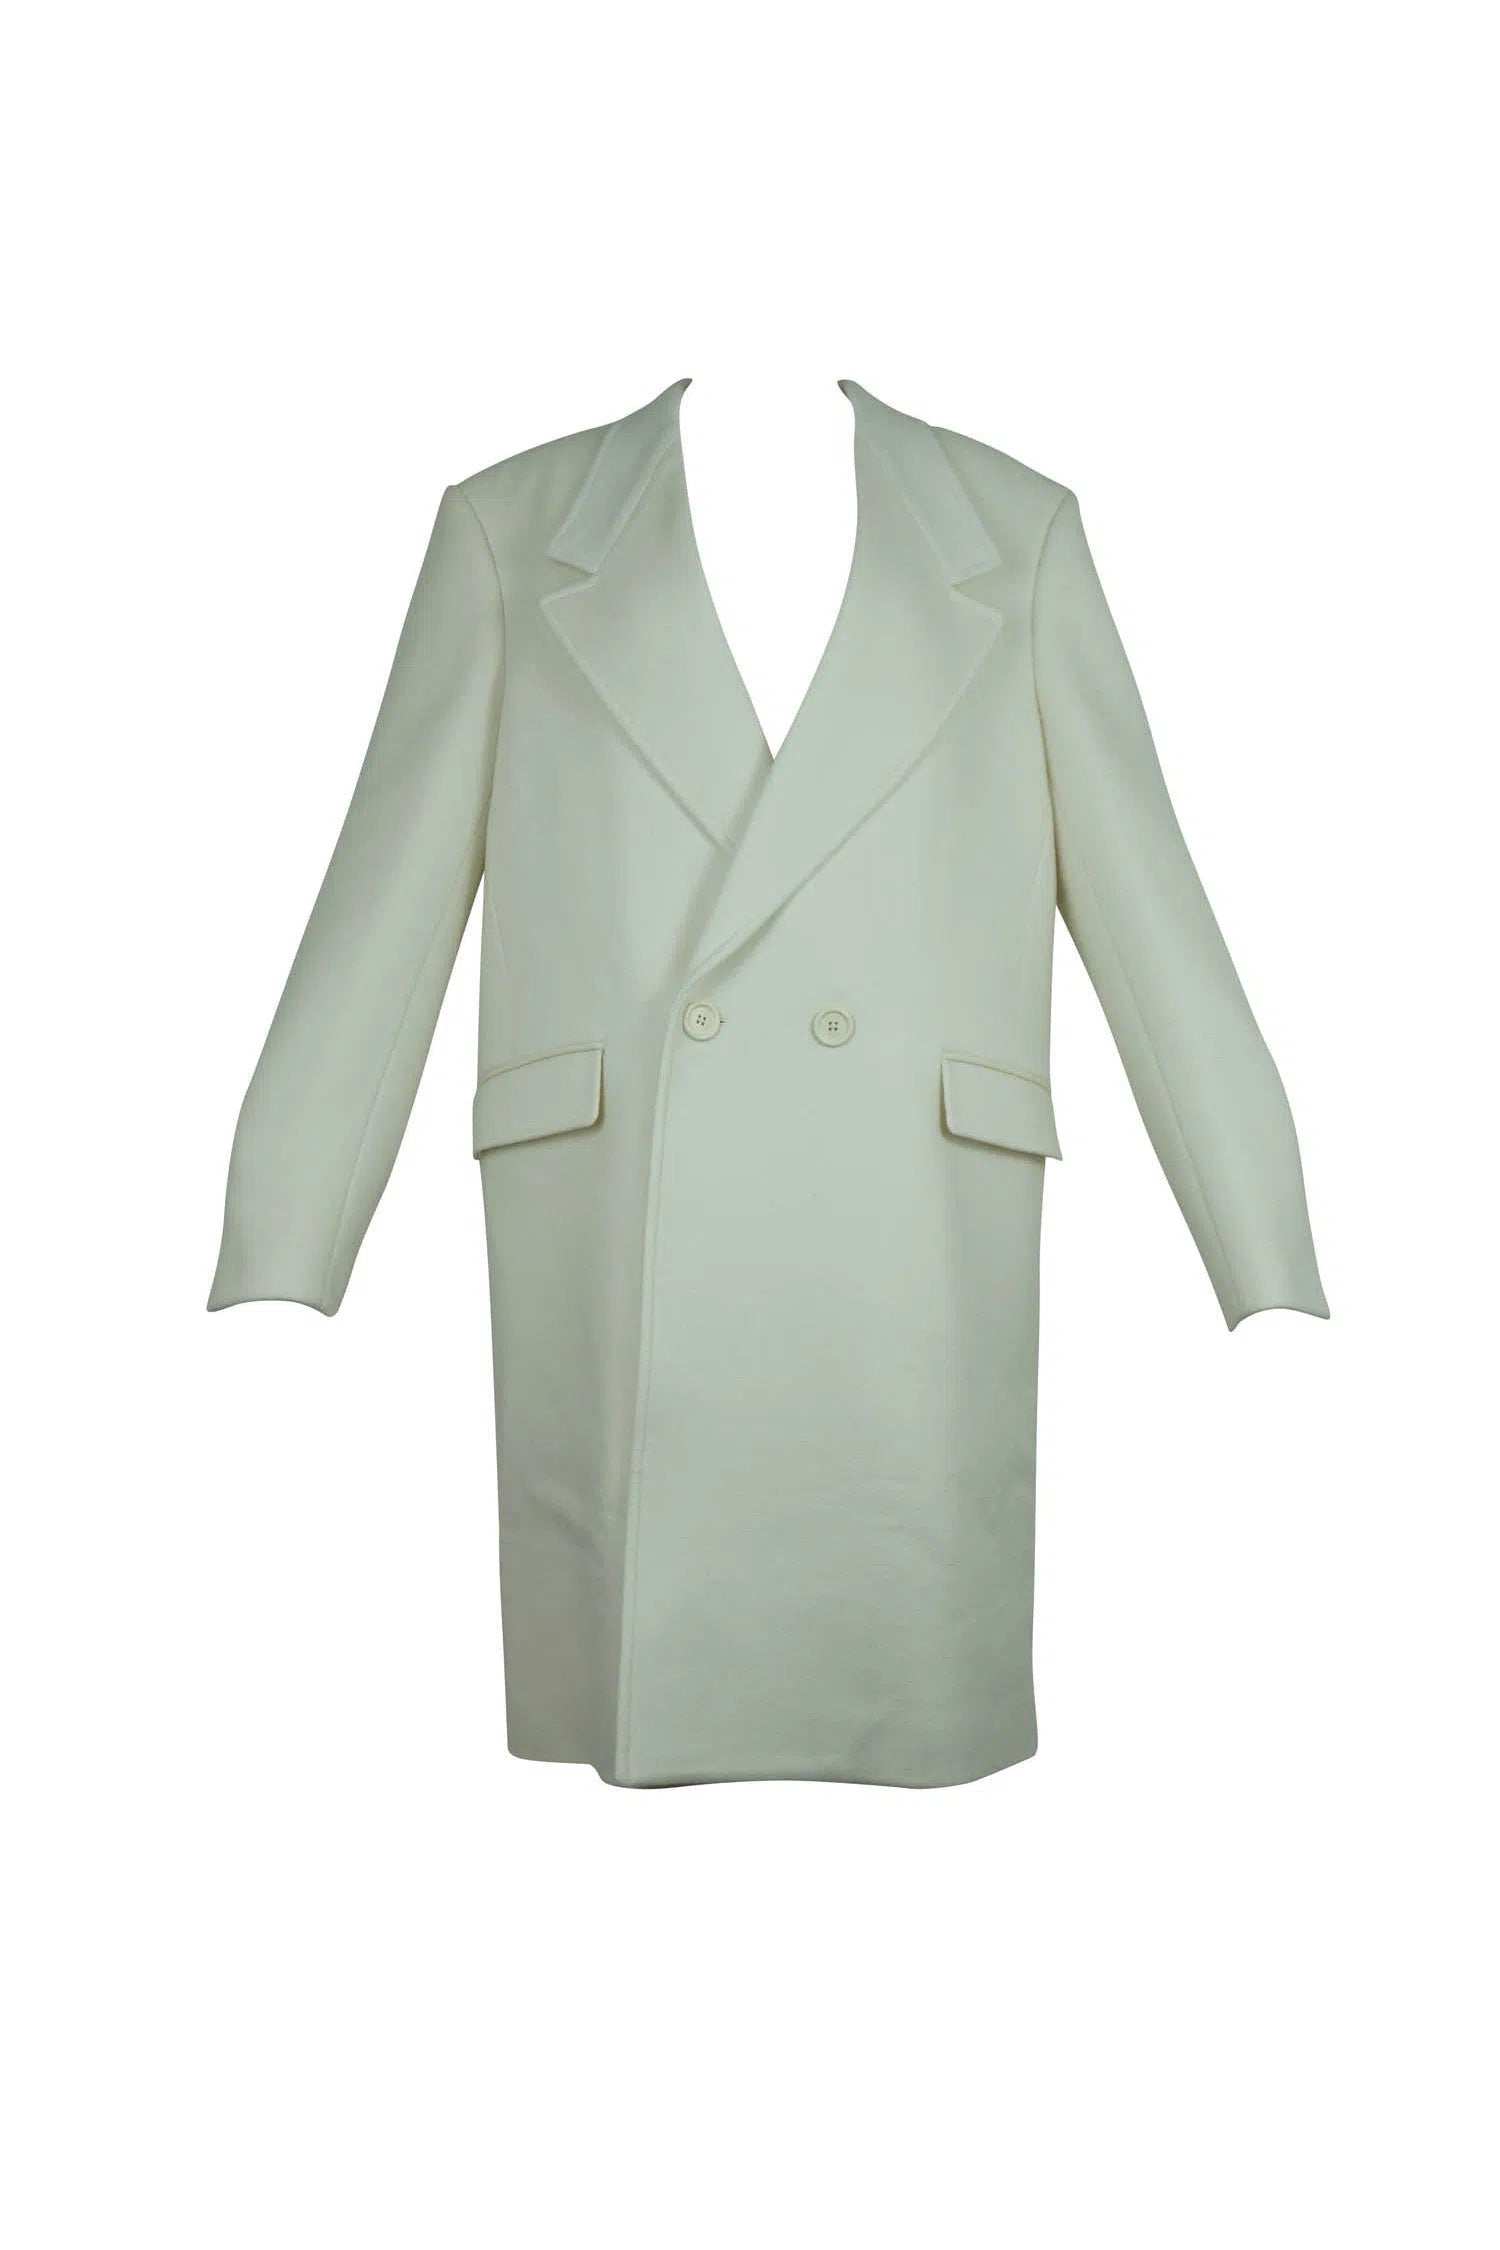 Celine Ivory Cashmere Tailored Over Coat NWT Sz 46